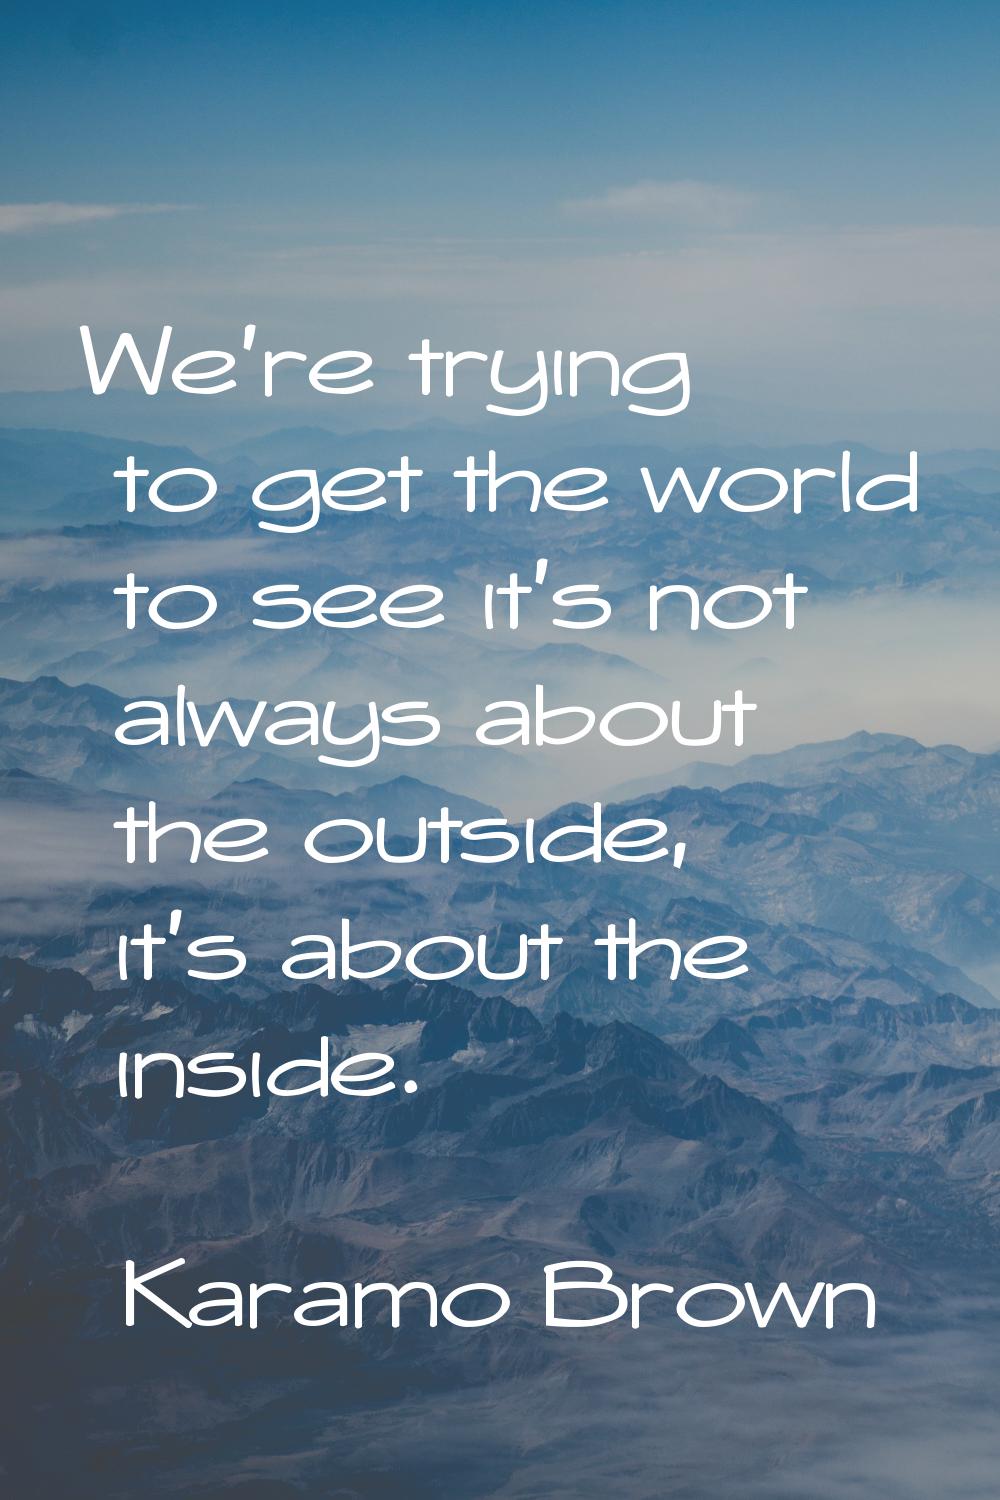 We're trying to get the world to see it's not always about the outside, it's about the inside.